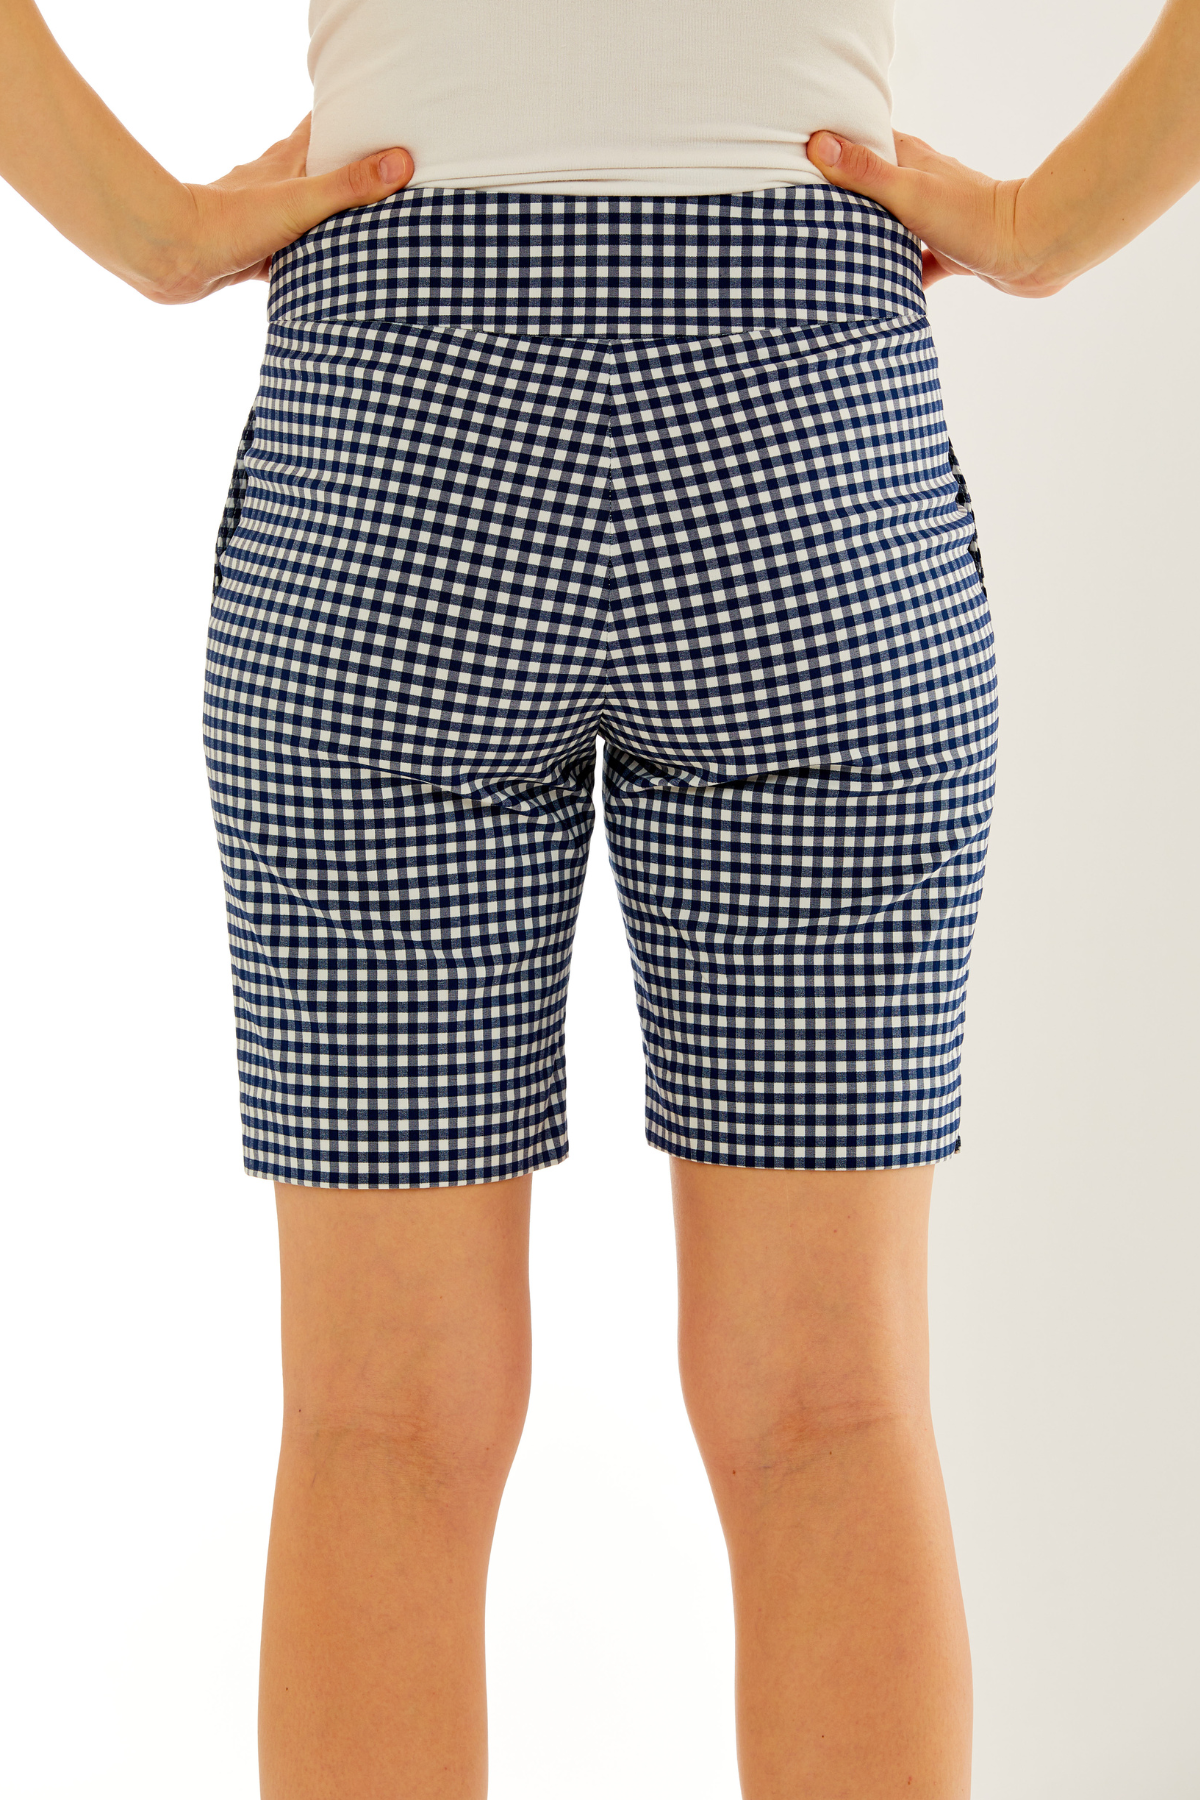 Woman in navy and white gingham short